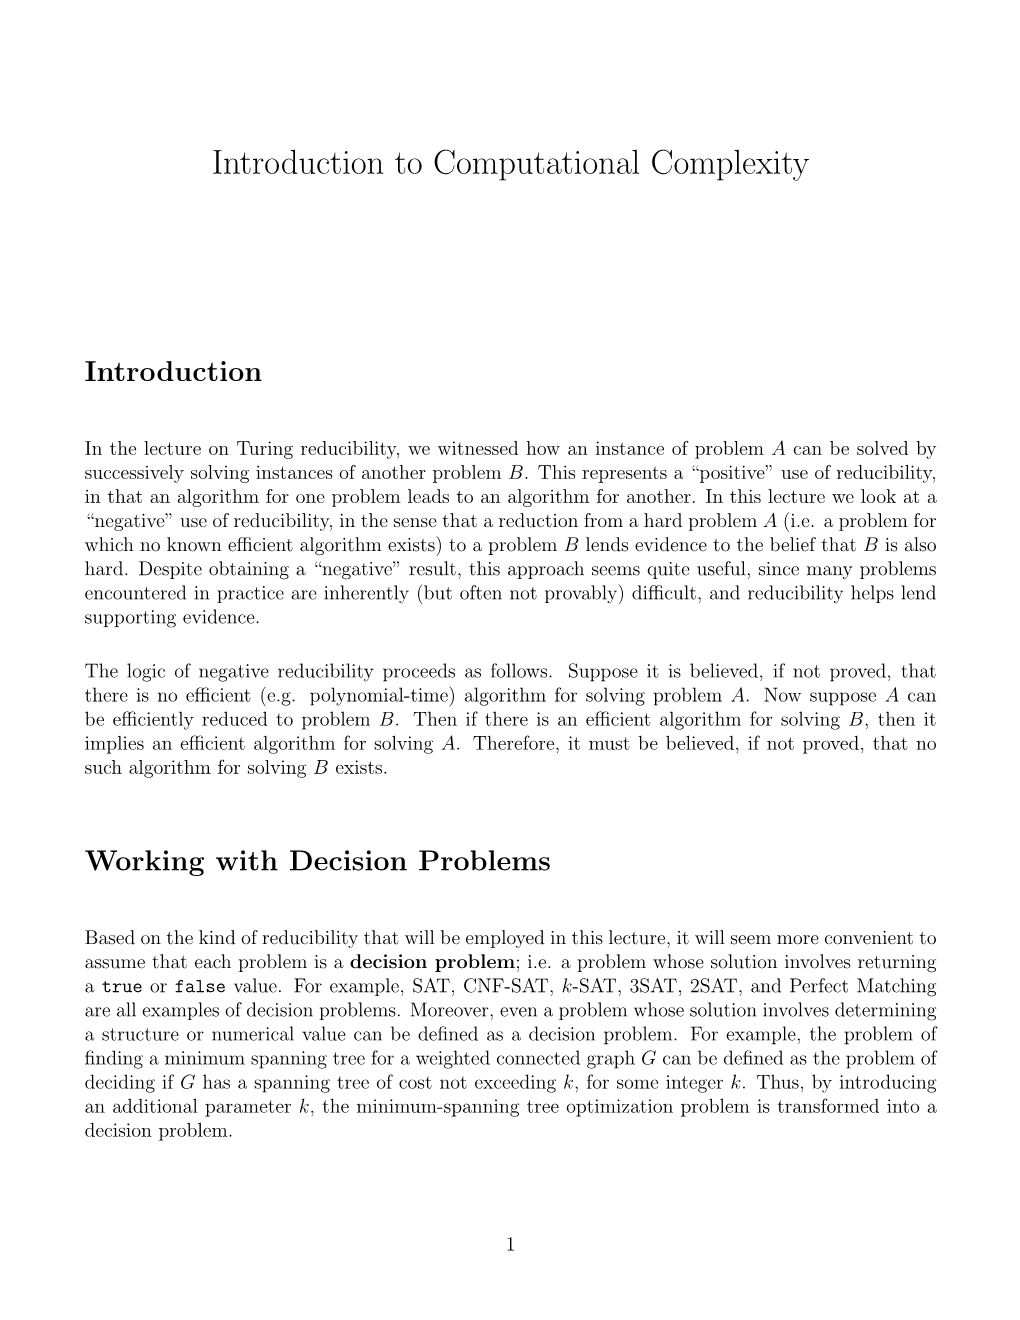 Introduction to Computational Complexity Classes